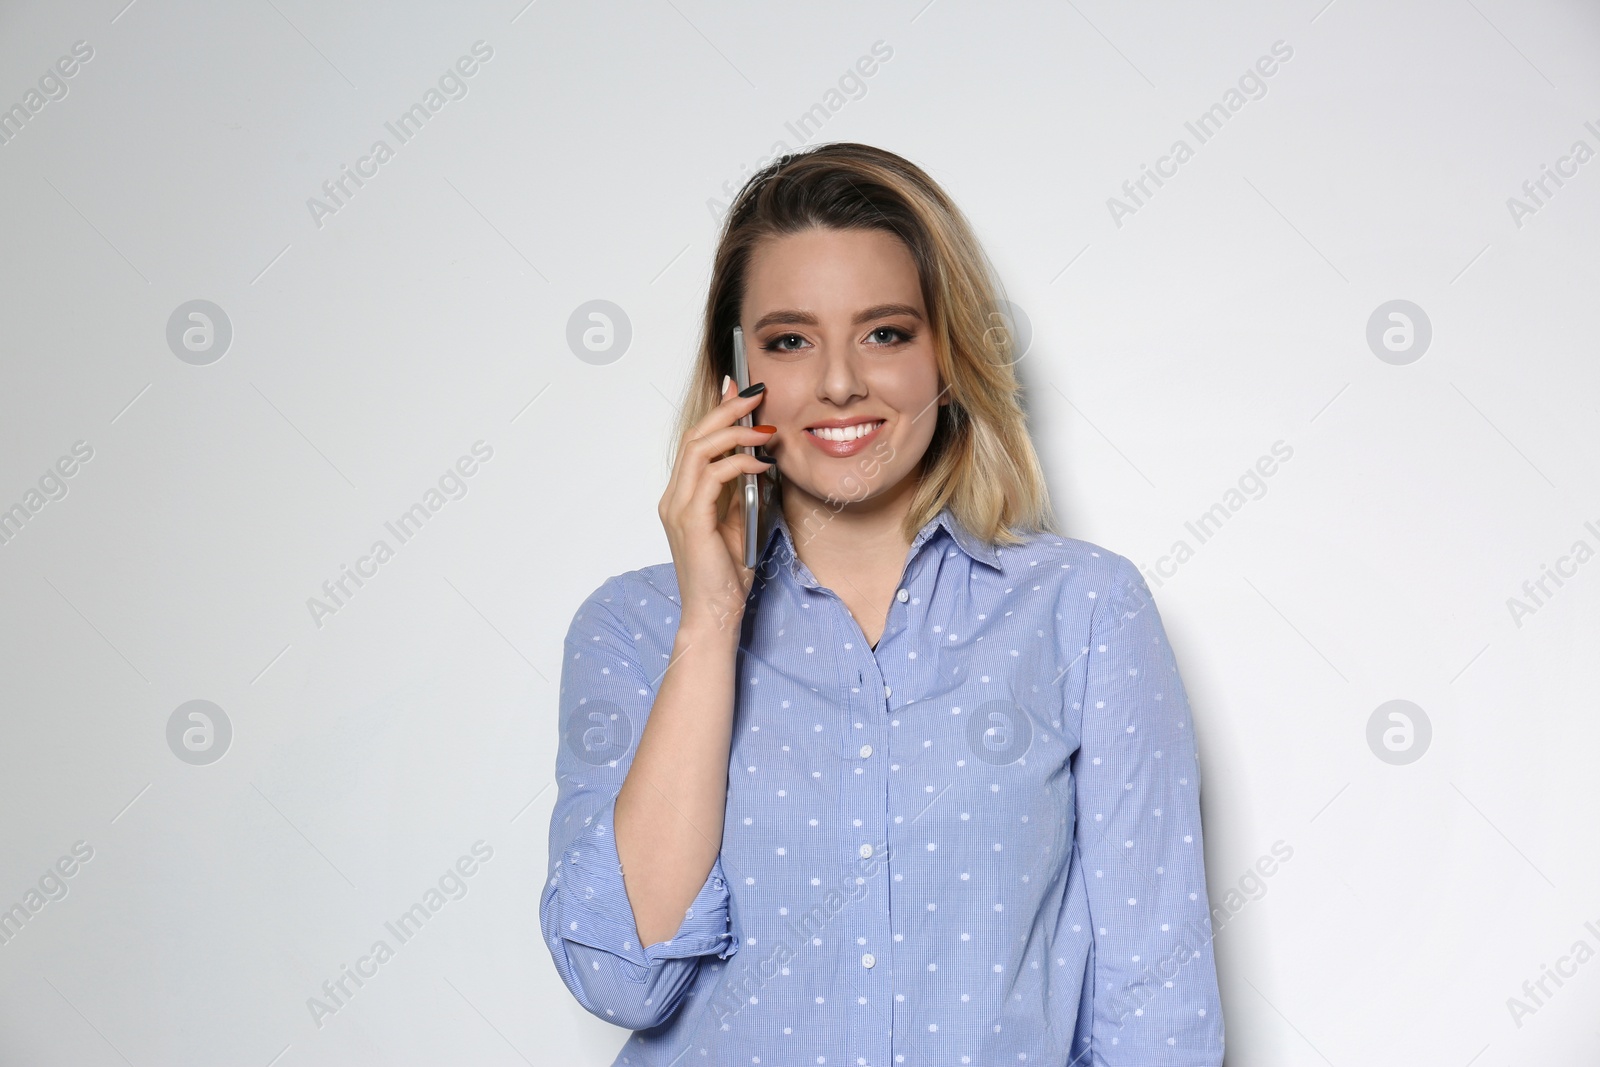 Photo of Portrait of beautiful young woman talking on phone against light background